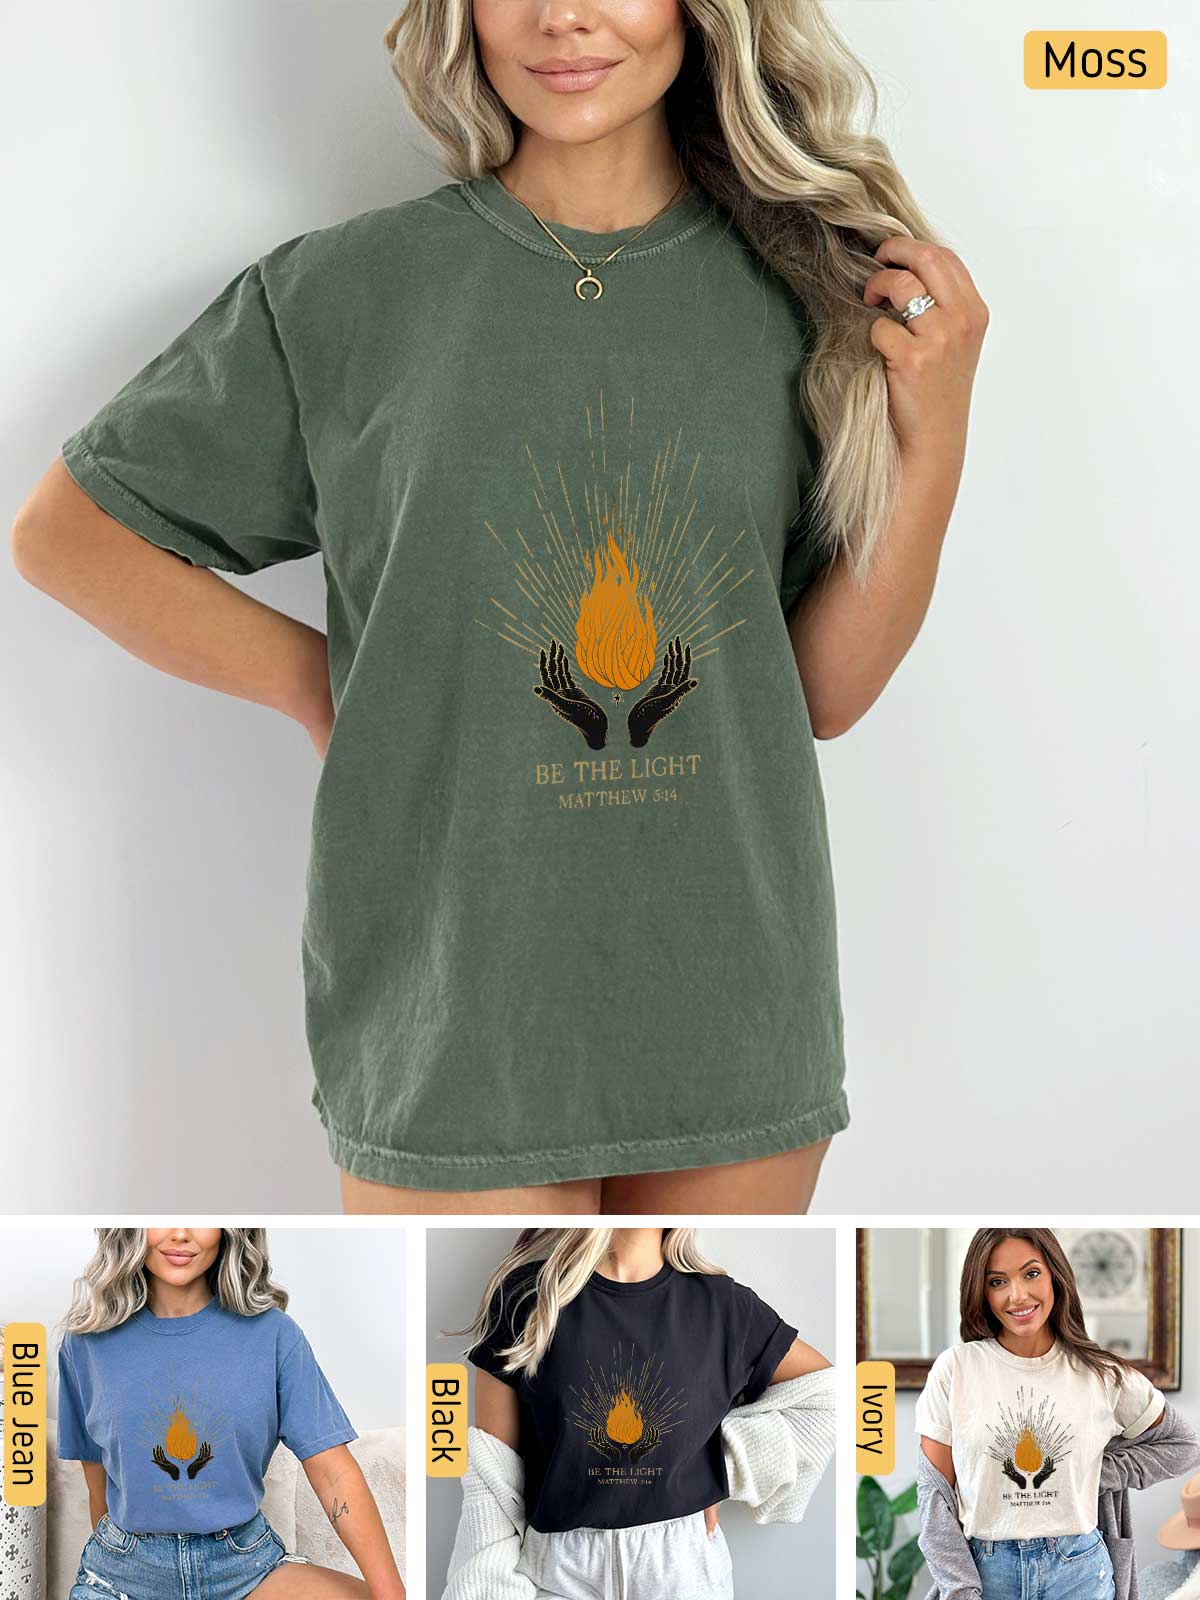 a woman wearing a t - shirt with a fire on it